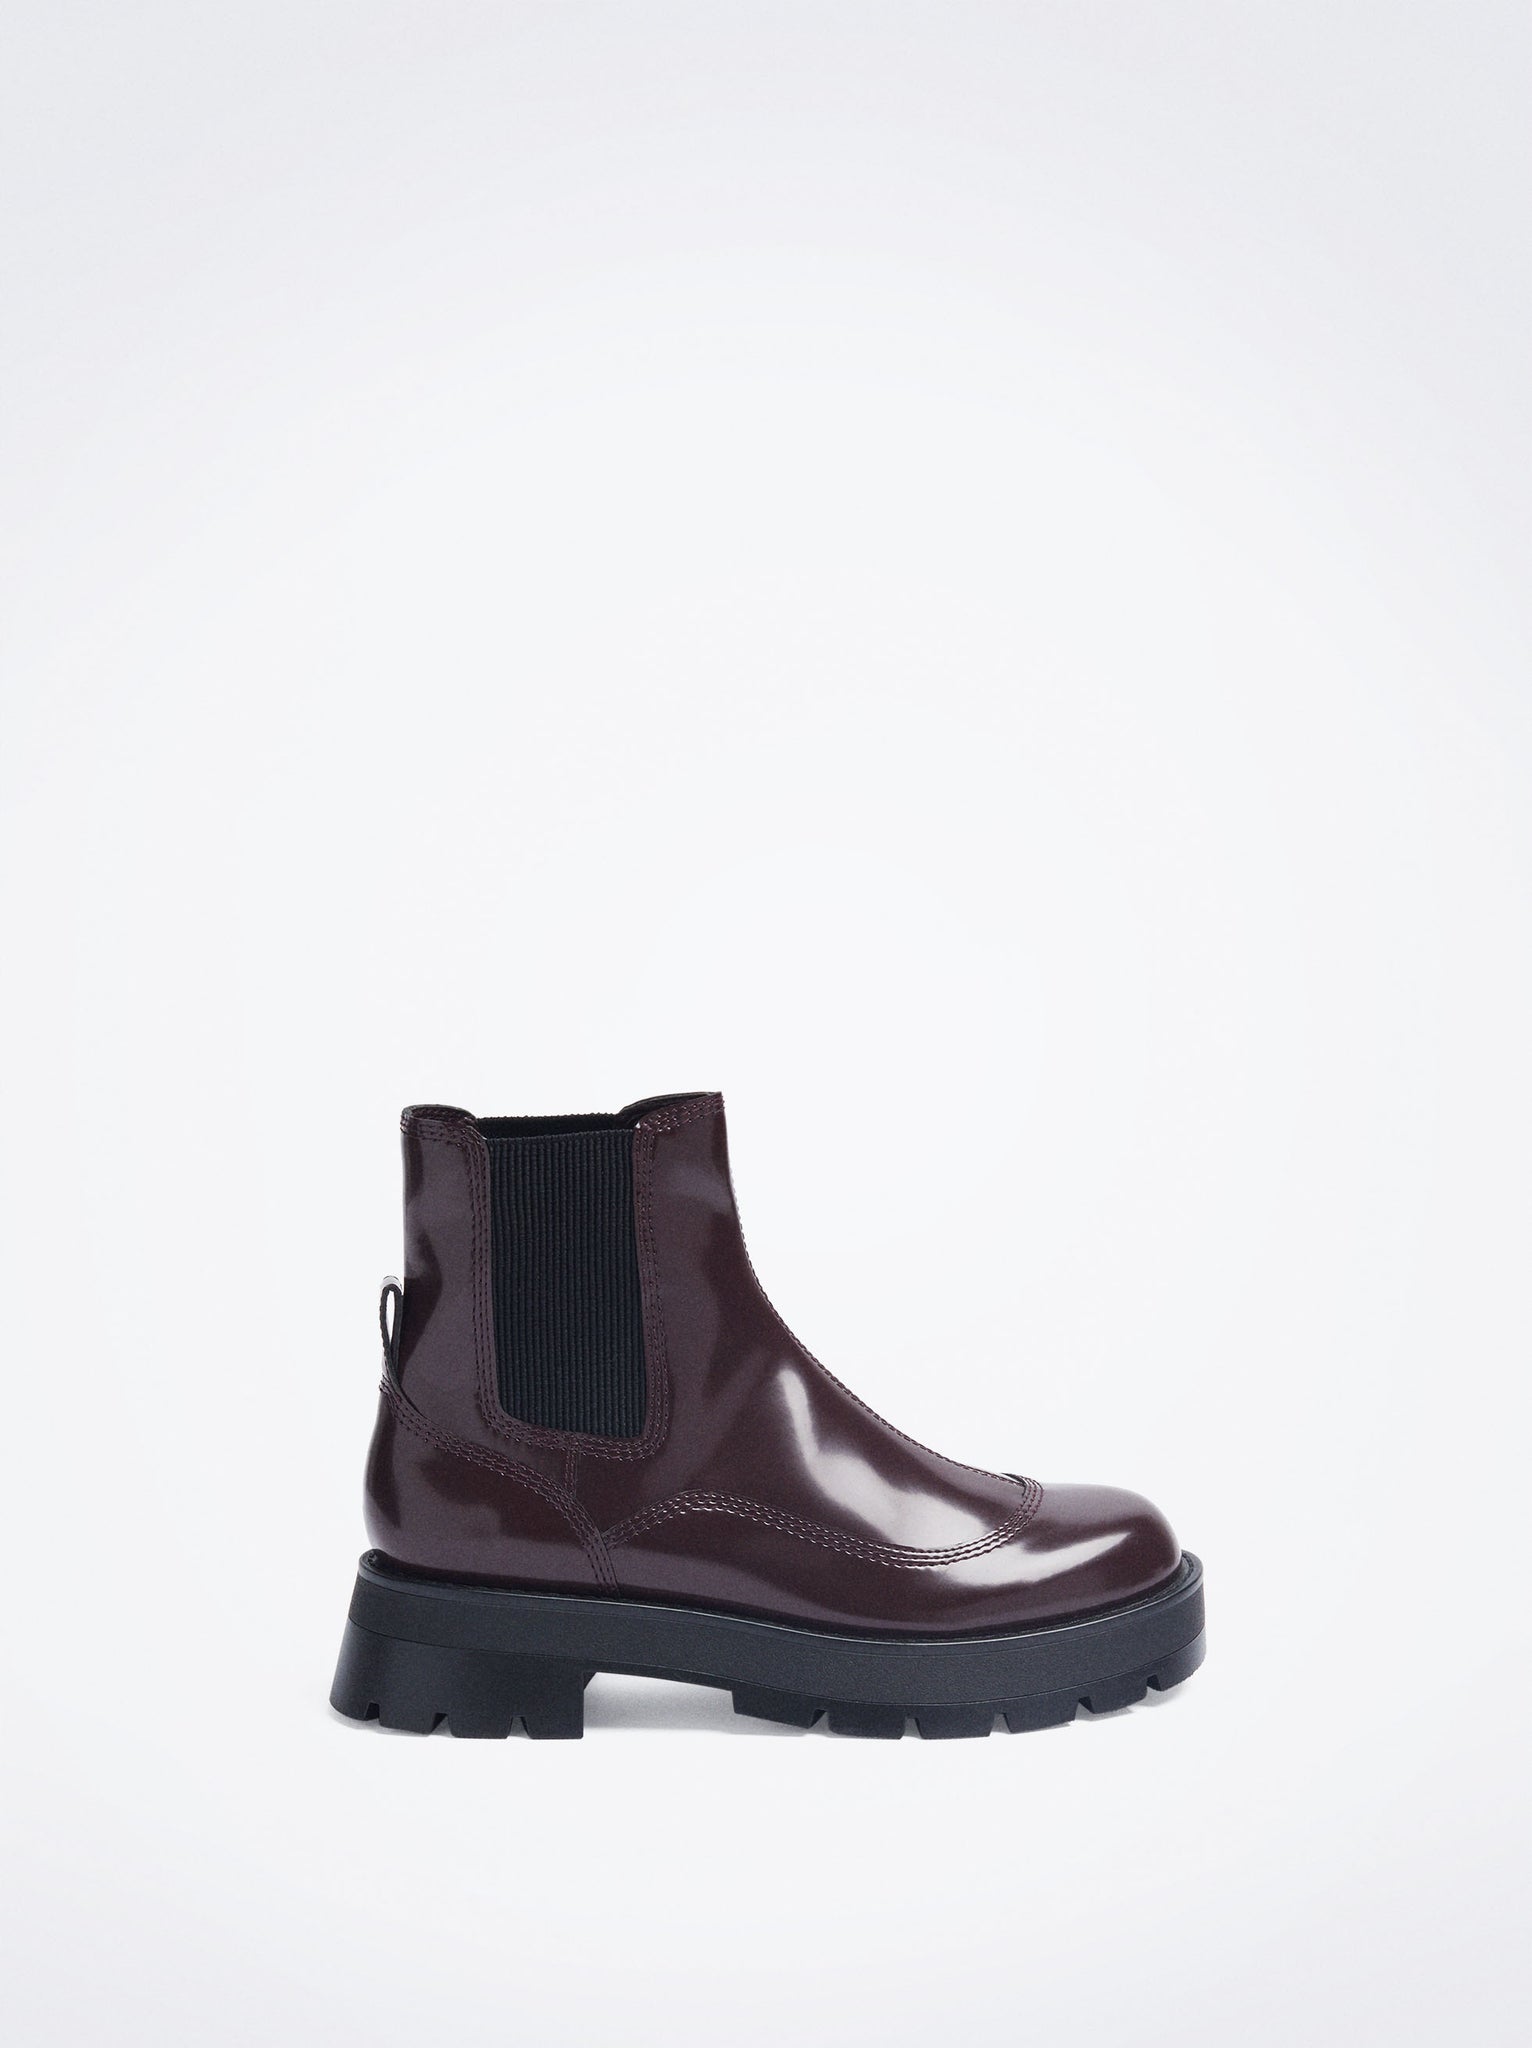 Track Sole Elastic Ankle Boots